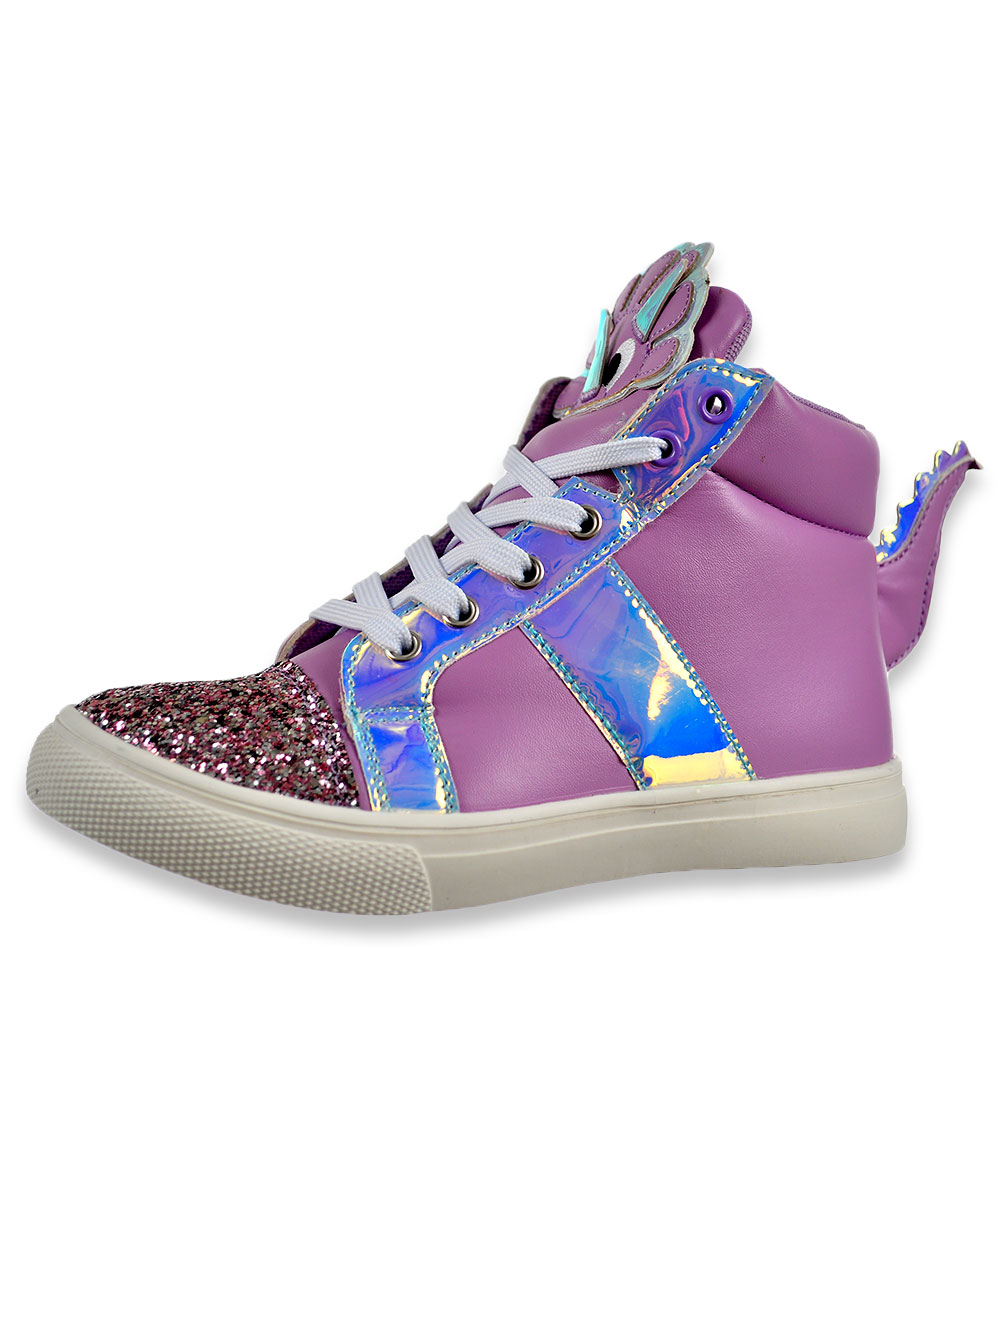 purple sparkly sneakers